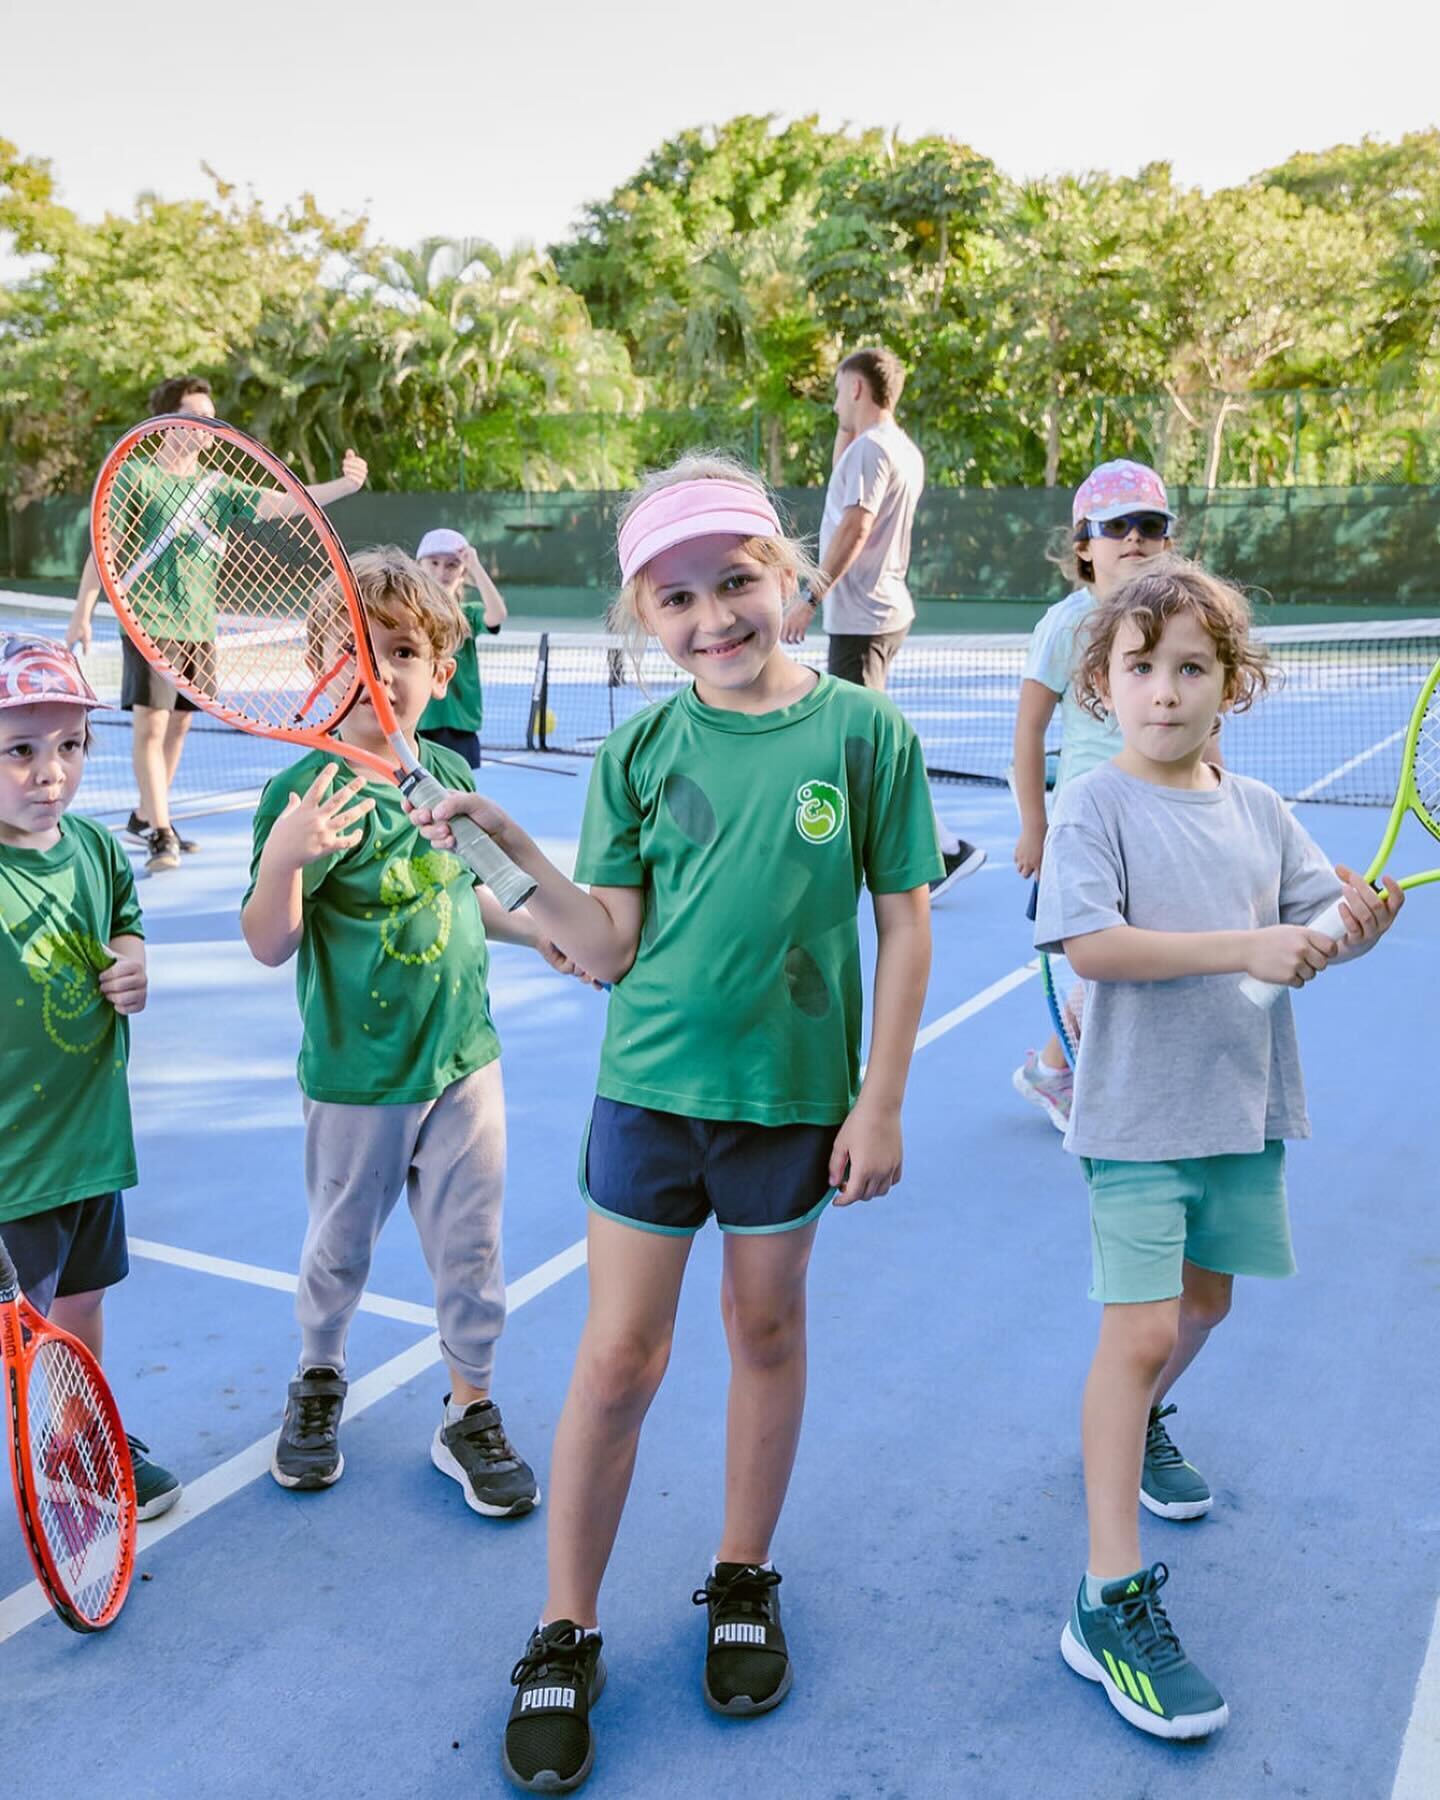 Capturing the joy and energy of the early start in tennis at Iguana Tennis! 🎾. Get your little champs in the game early, and watch them grow with every serve. 🌟

Send us a DM 

#IguanaTennis #YouthTennis #StartYoung #TennisLife #FutureChampions #Se